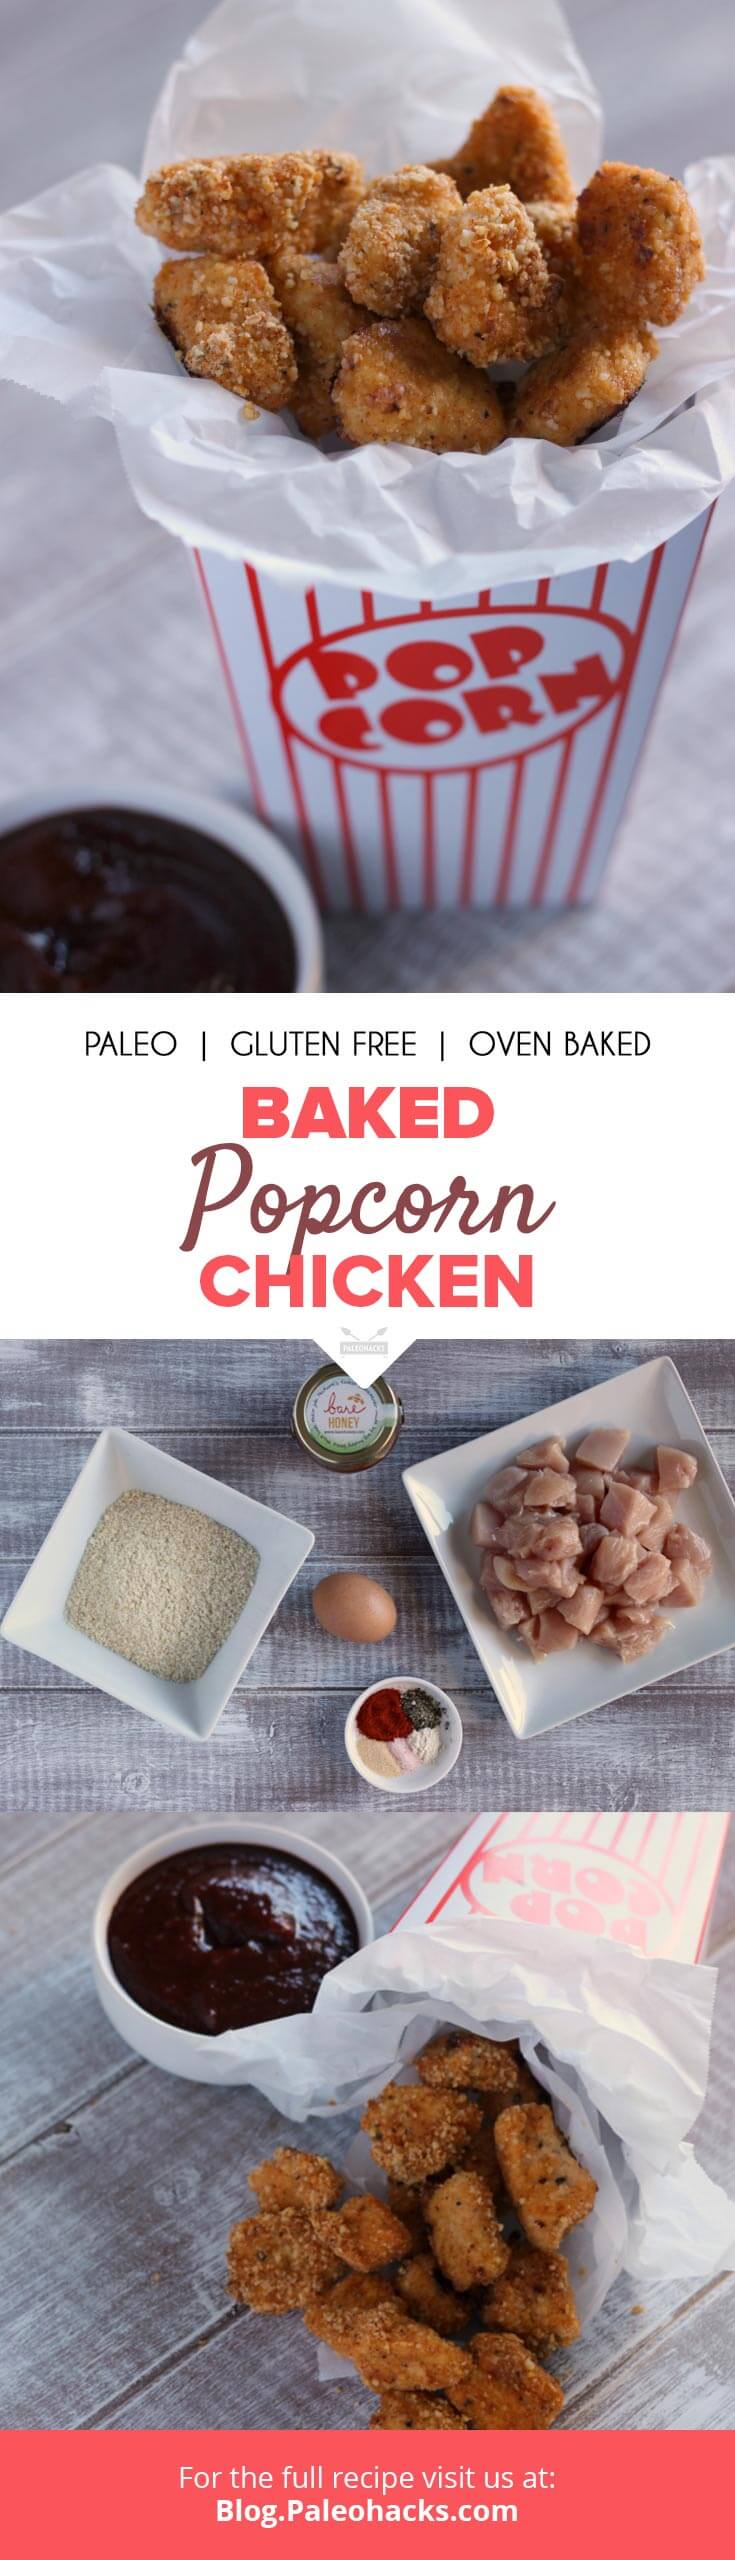 Love chicken? You'll love these Baked Popcorn Chicken bites even more! They are a quick and easy meal that the whole family including your kids will enjoy.